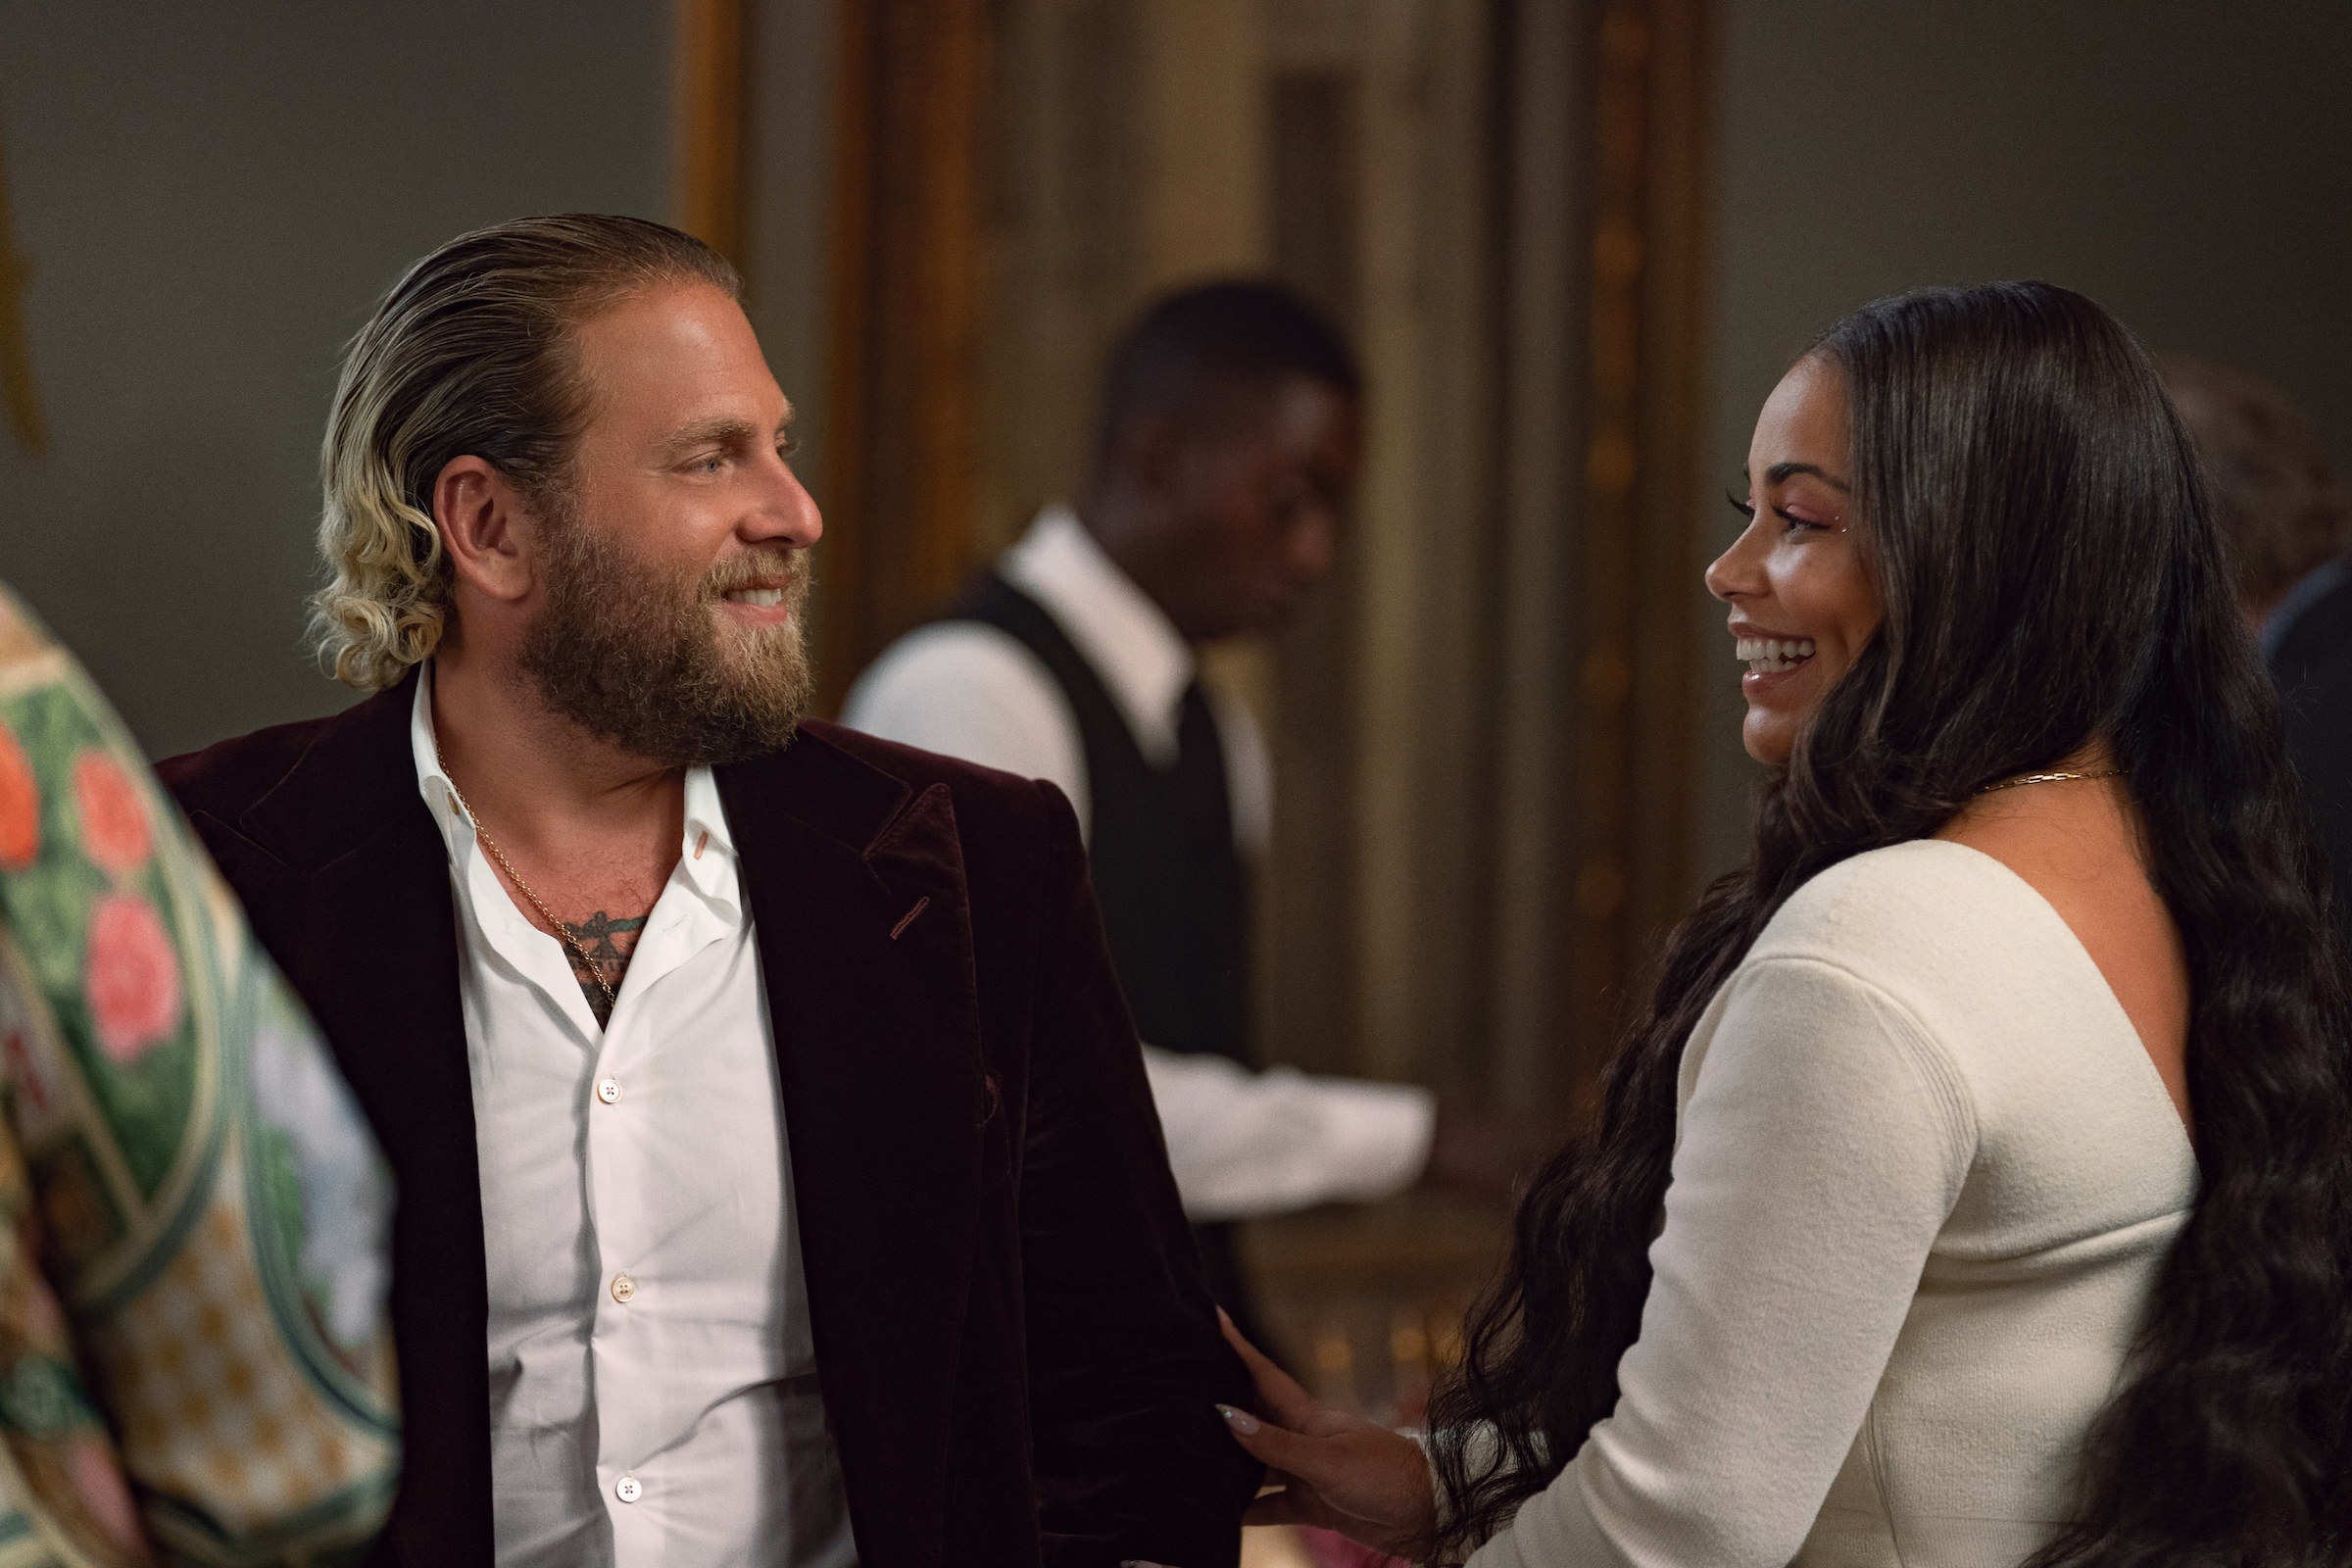 Jonah Hill, Lauren London Kiss in You People Done with CGI, Costar Claims